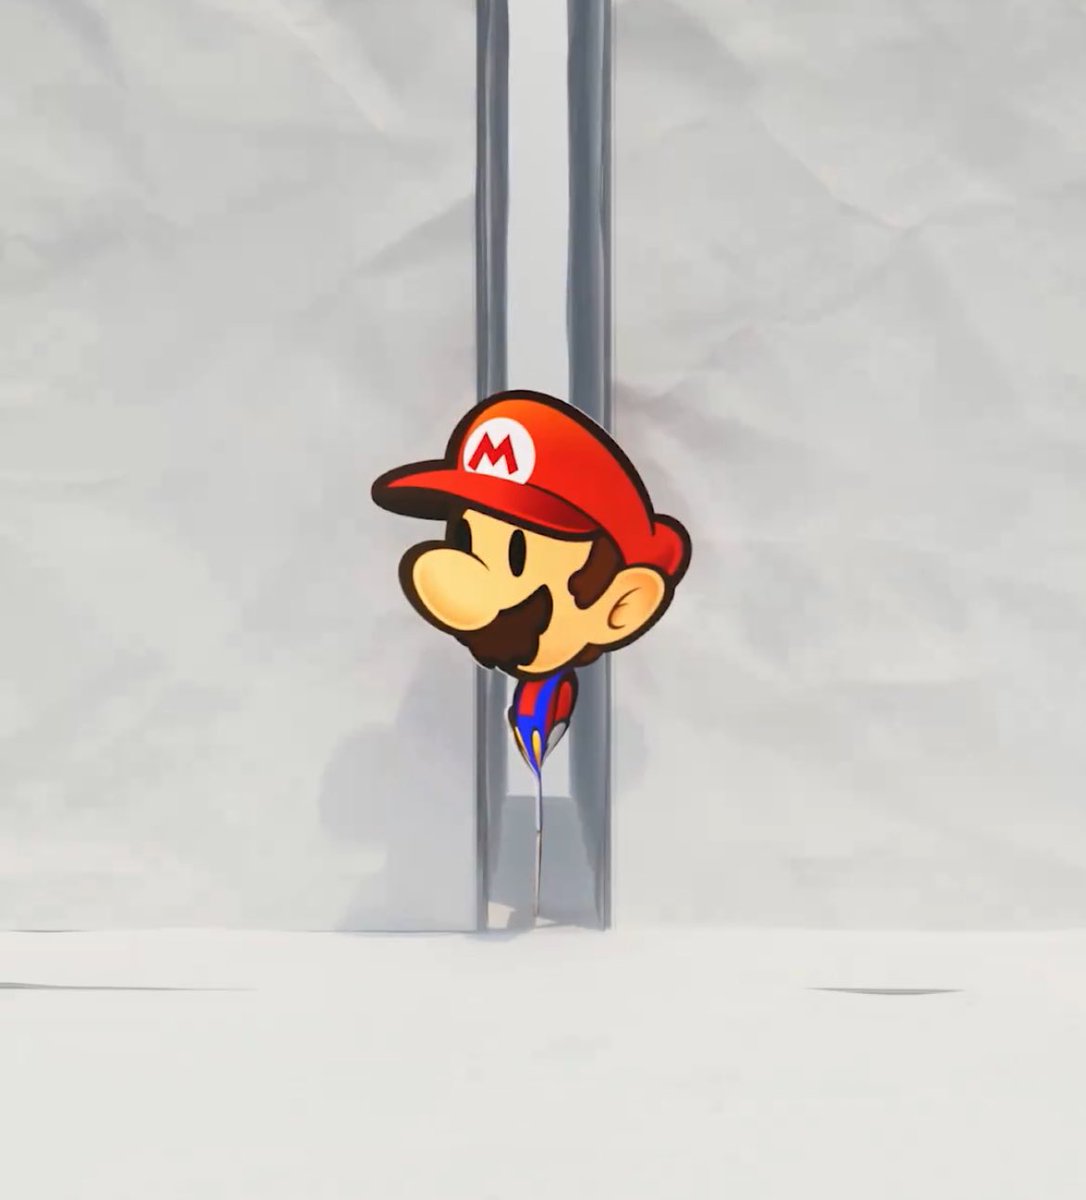 Mario peeking out. - Paper Mario: The Thousand Year Door Promotional Video